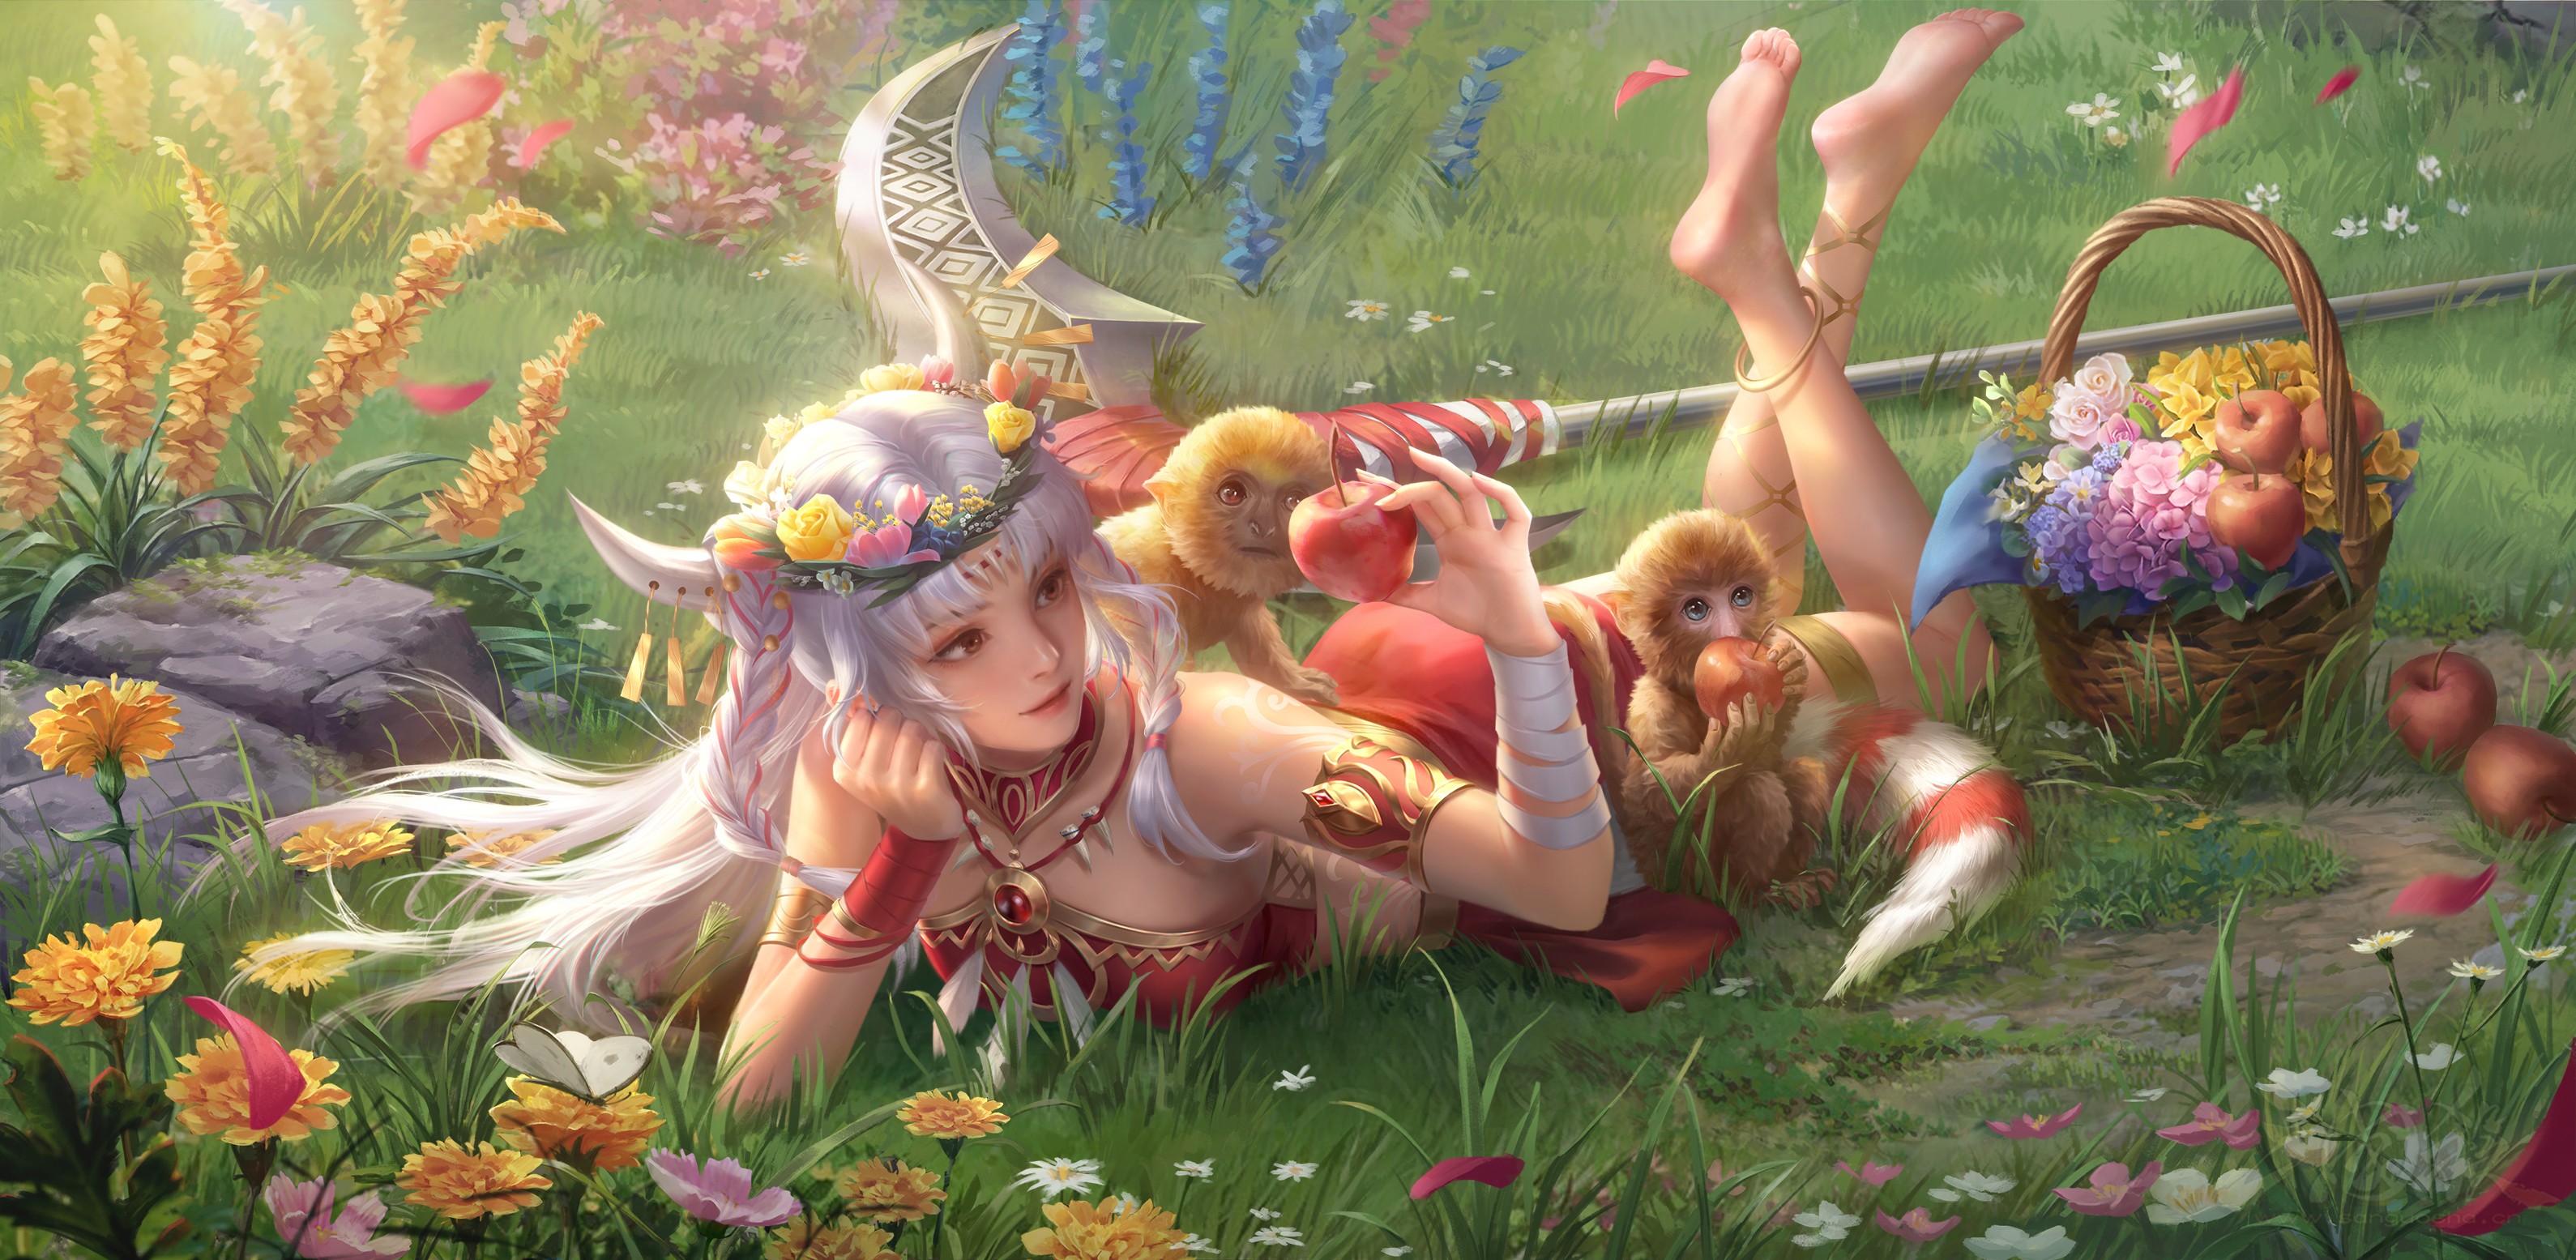 General 3179x1555 Three Kingdoms sanguosha apples Asian women video game characters video game art grass video games flowers petals feet foot sole feet in the air fruit baskets smiling lying down lying on front